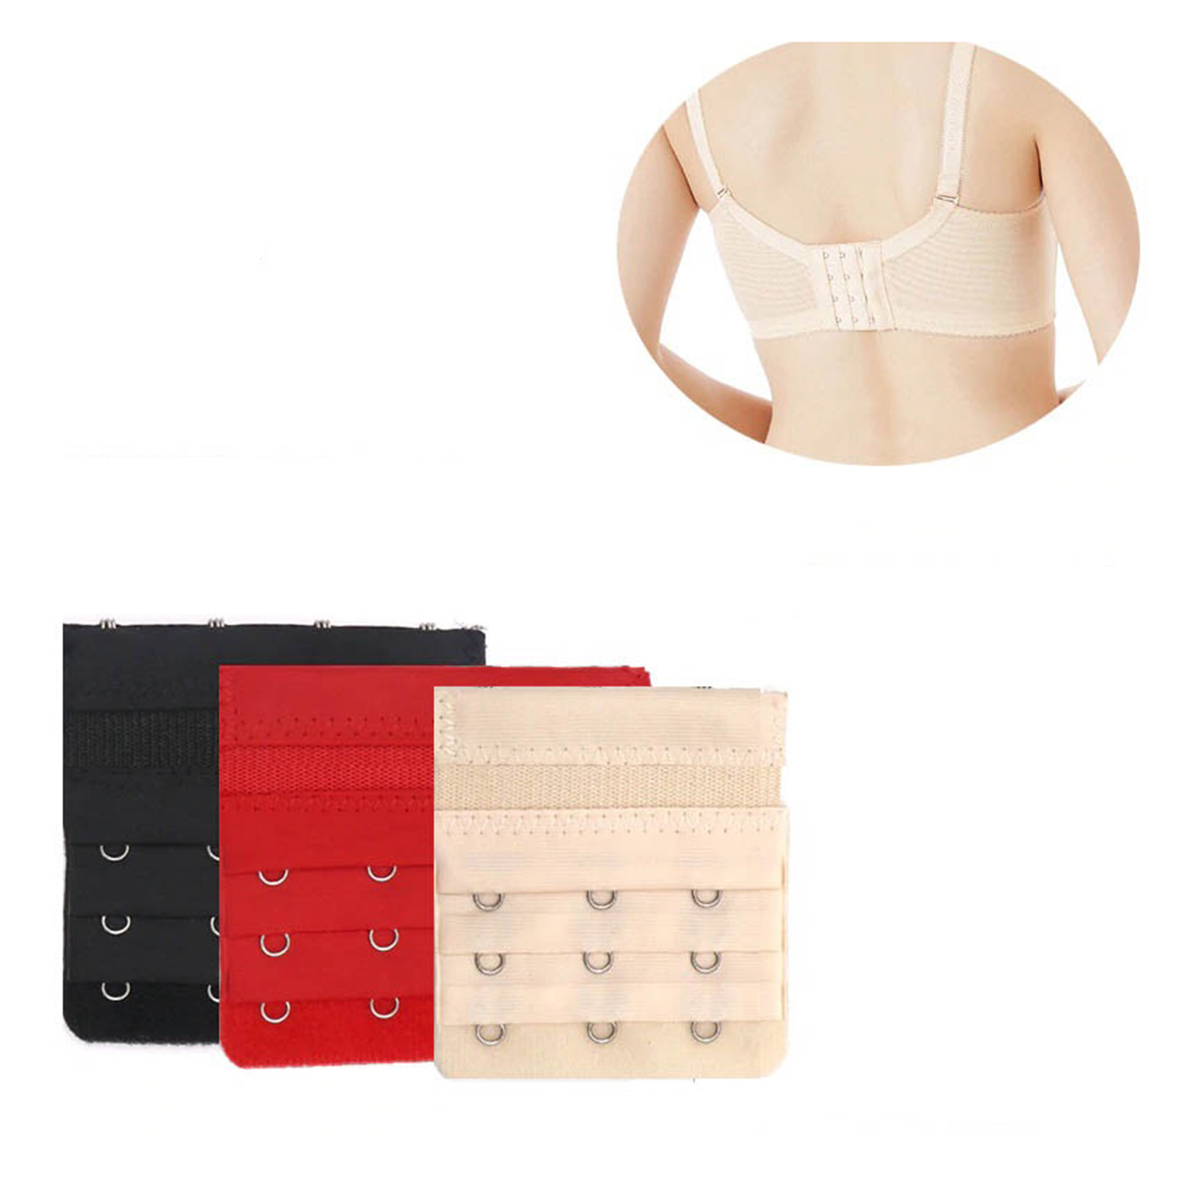 Bra Extender Strap Extension Lengthened Adjustable Replacement Buckle Wo